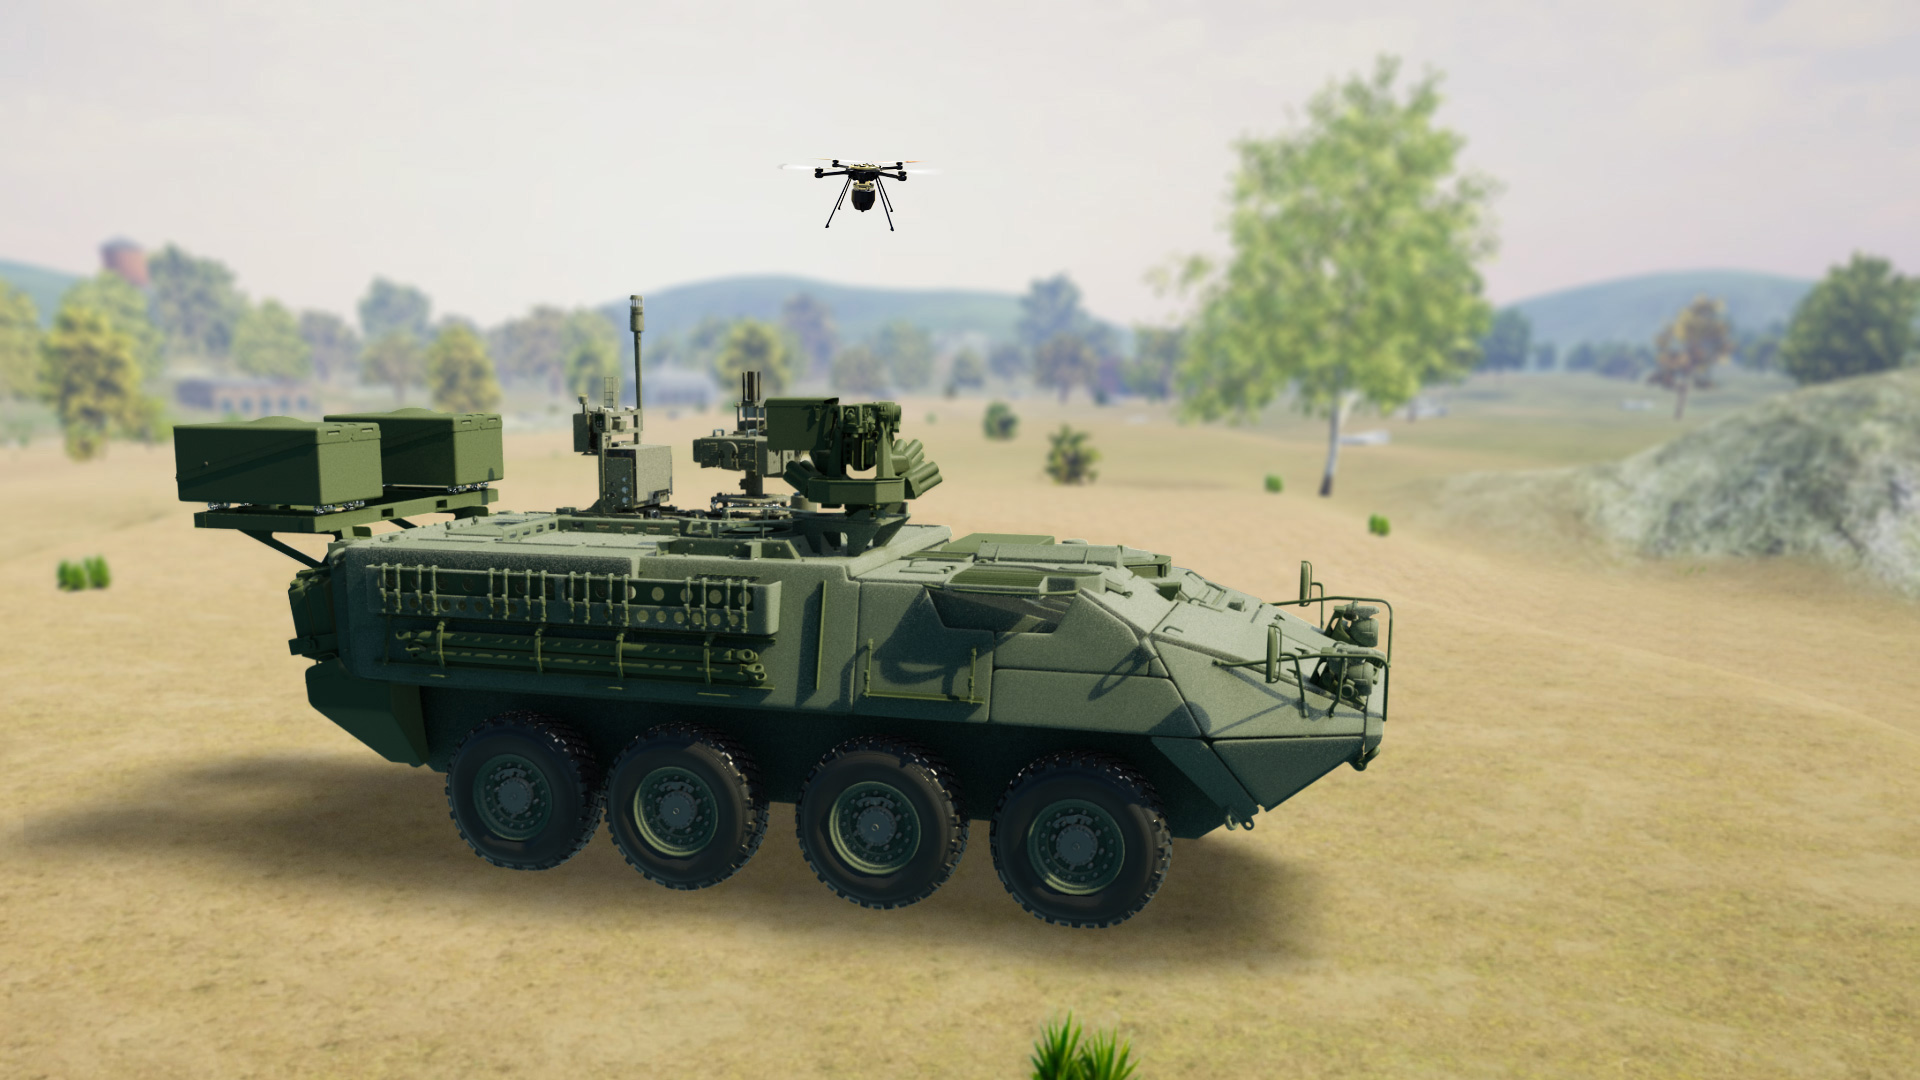 Nuclear, Biological, Chemical Reconnaissance Vehicle (NBCRV) and Unmanned Aircraft System Operator Training Simulator, by ForgeFX Simulations